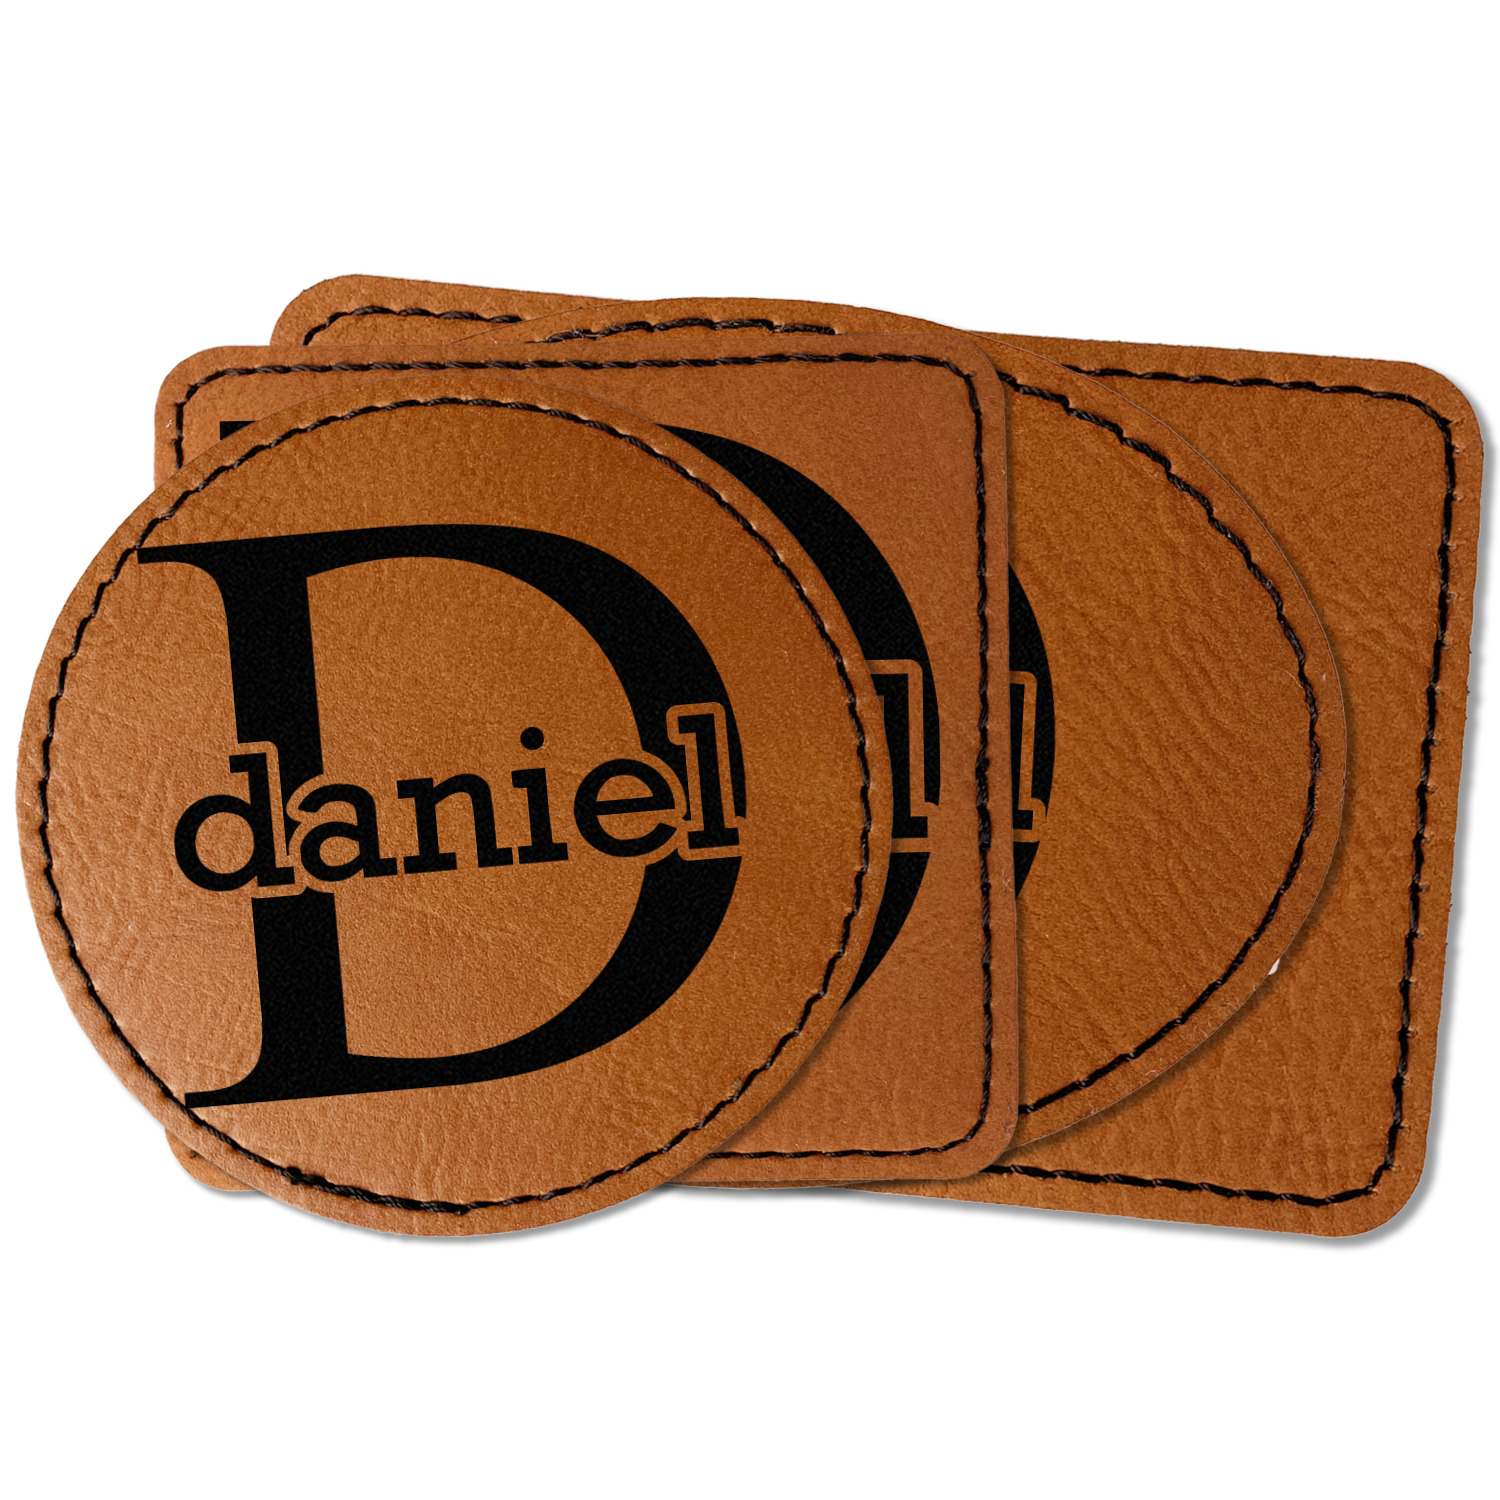 Custom Leather Patches - Blank or Personalized w/ Logo, Initials